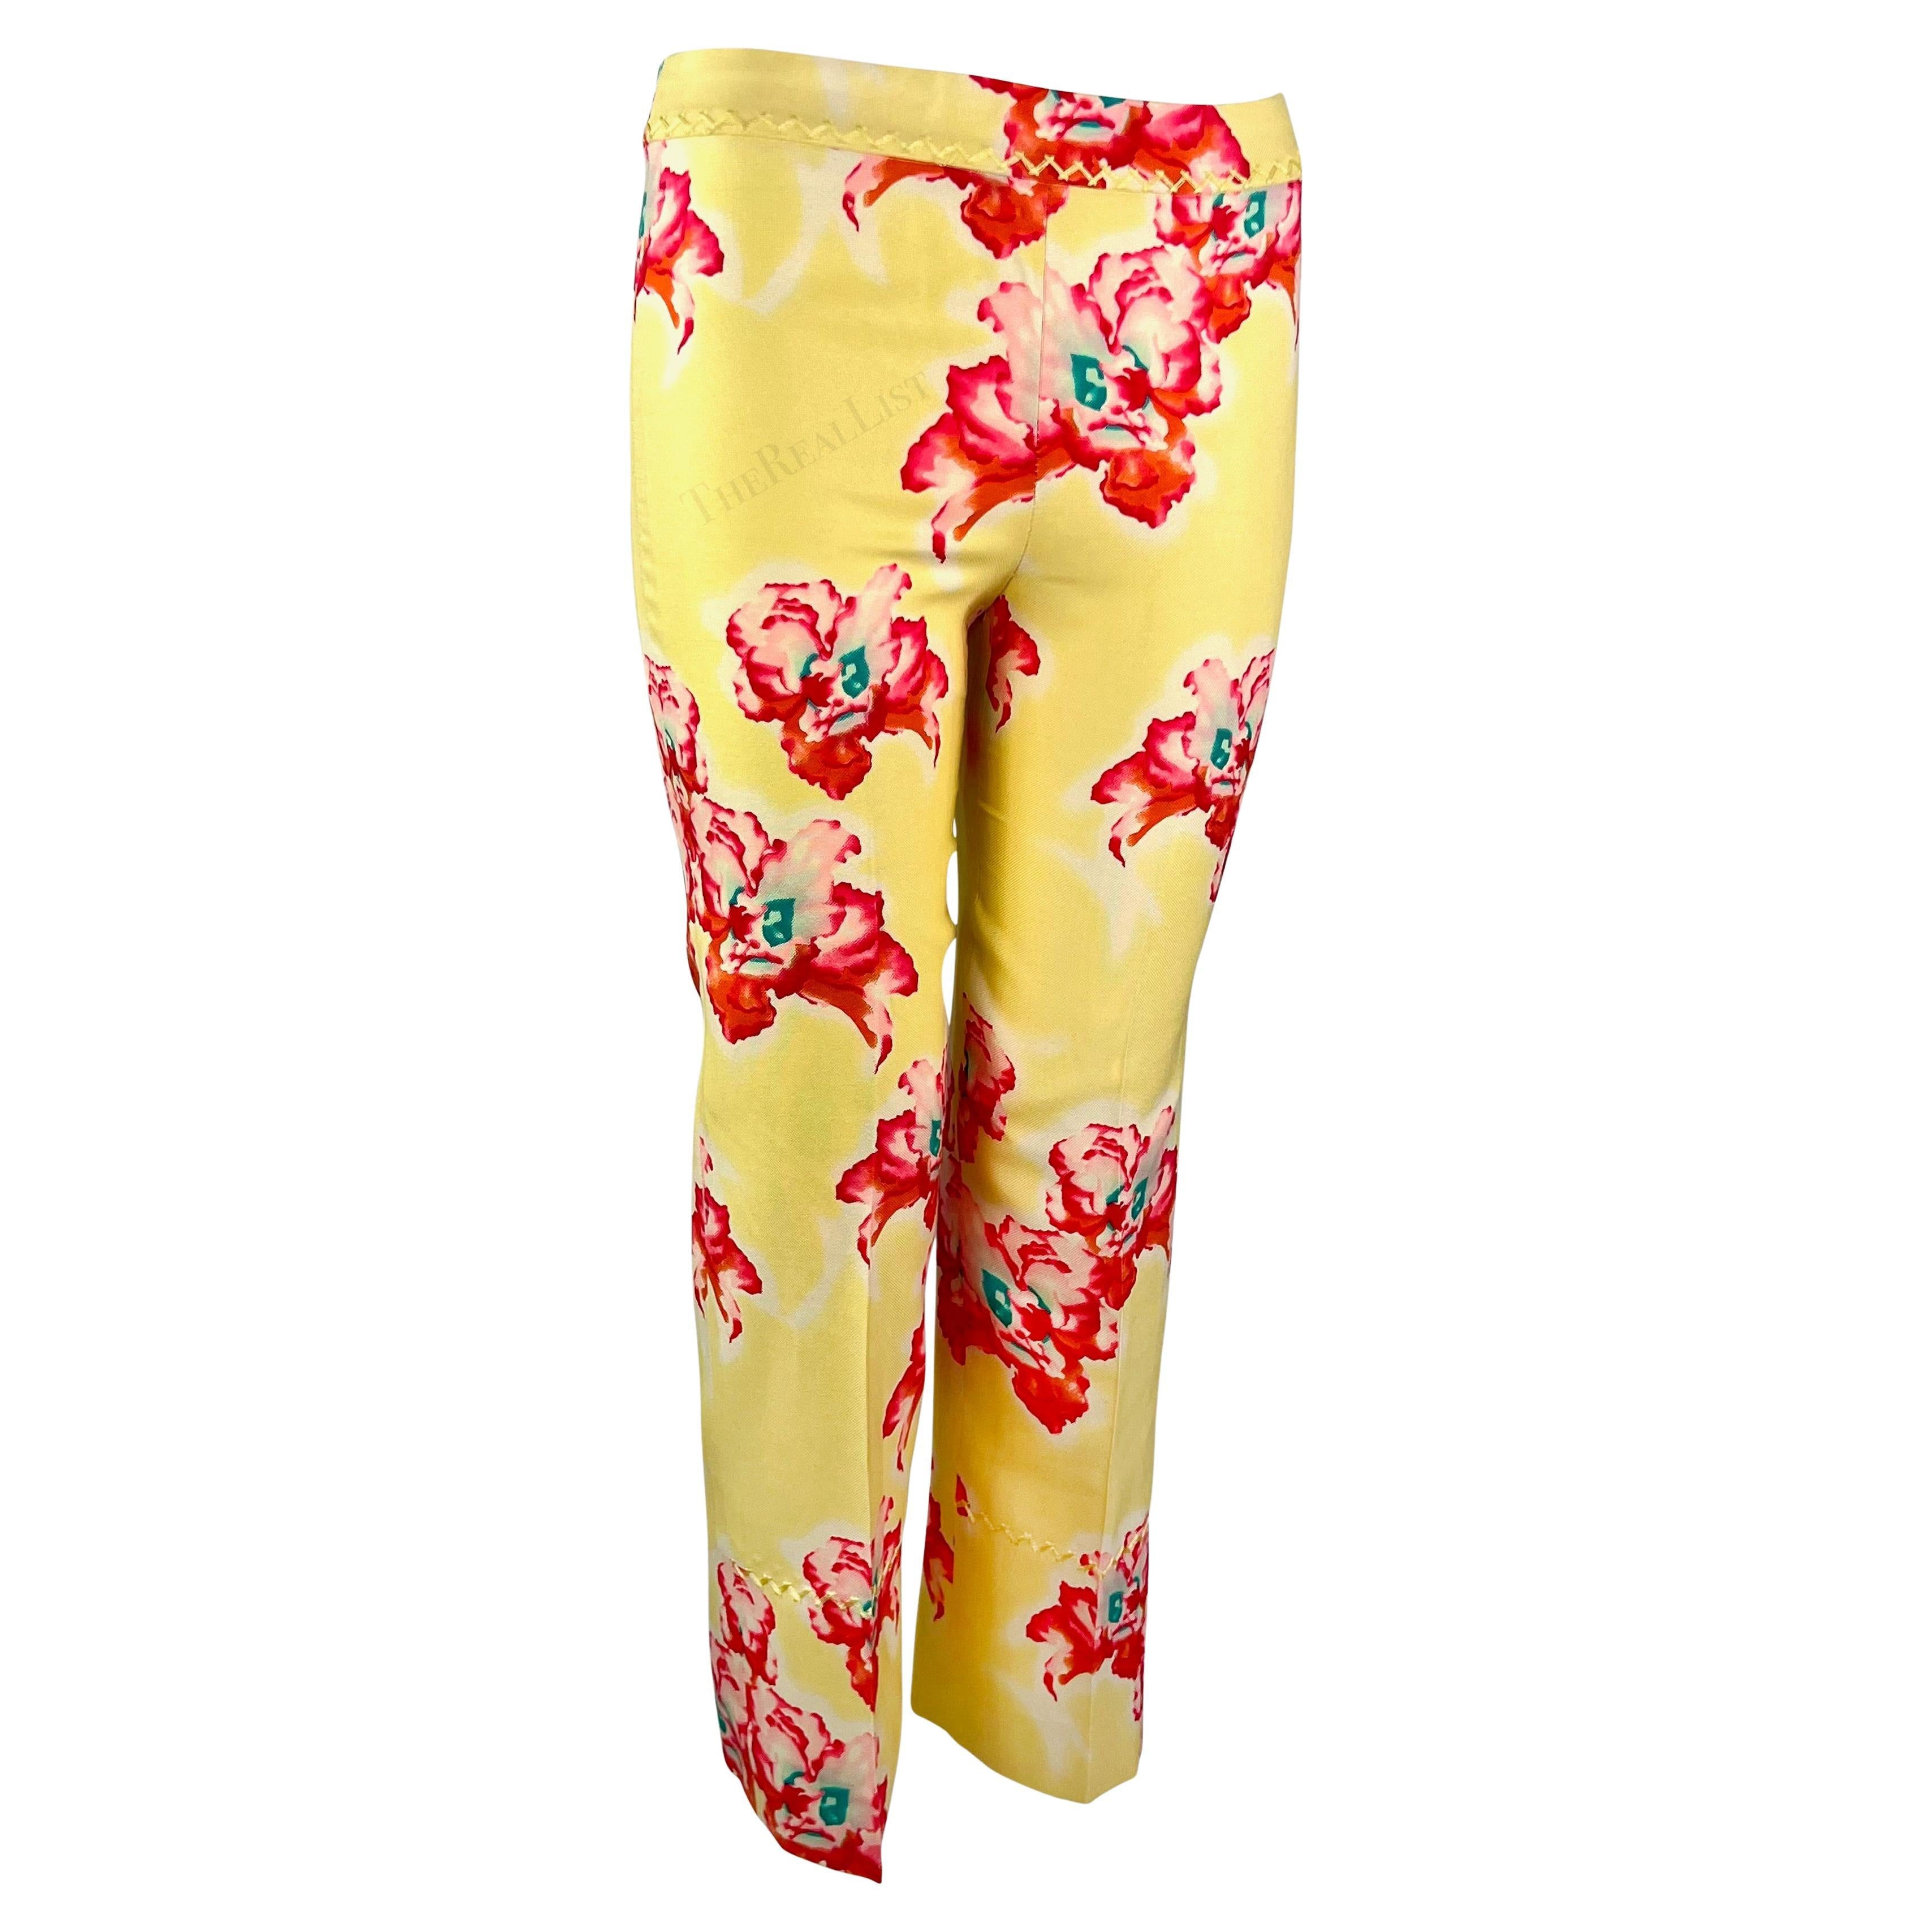 S/S 1999 Gianni Versace by Donatella Pink Yellow Orchid Print Silk Cropped Pants For Sale 6